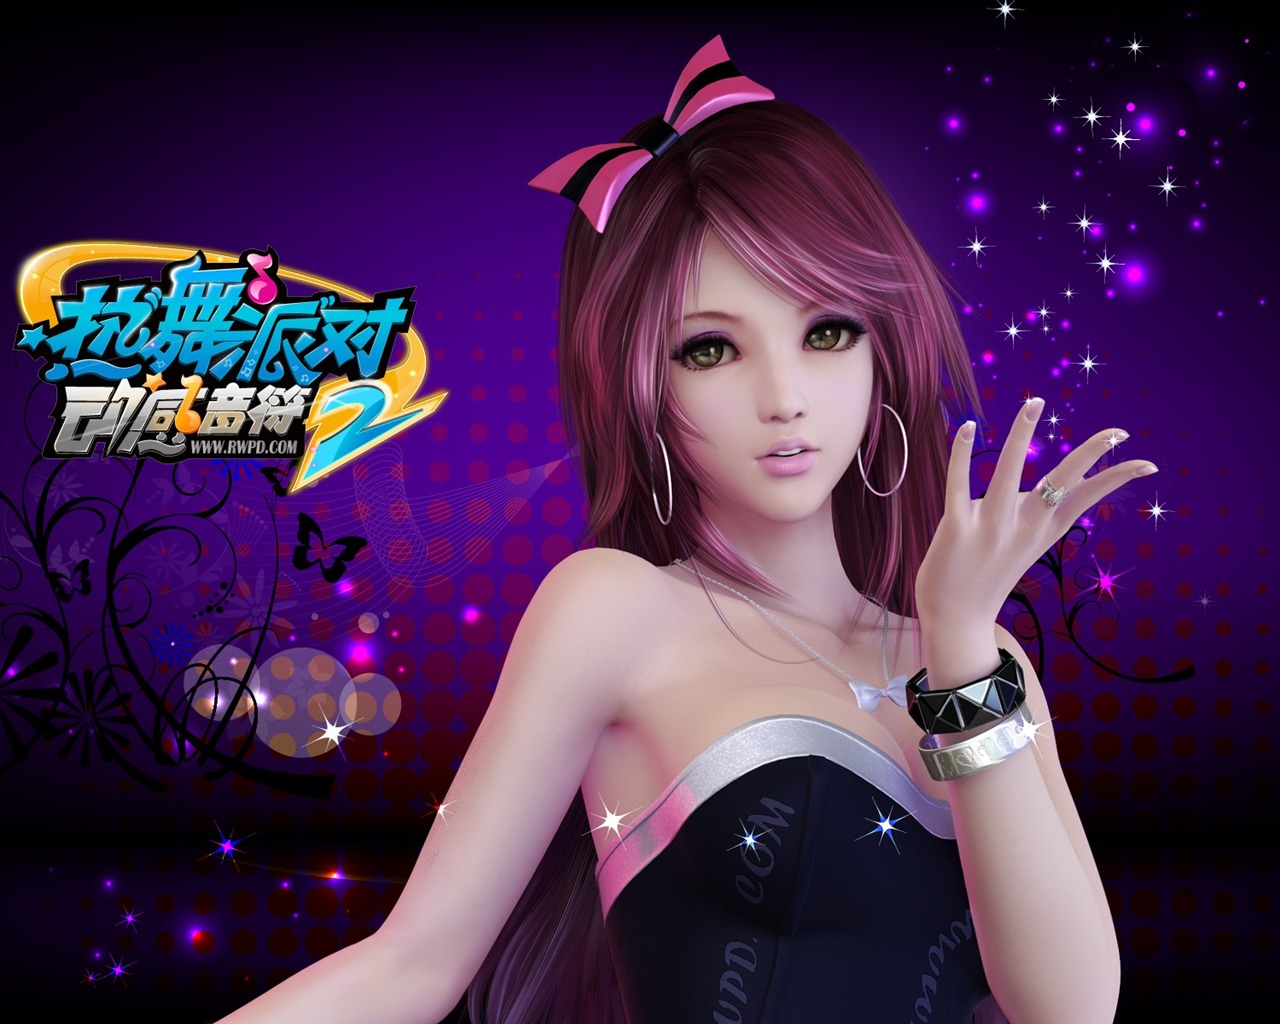 Online game Hot Dance Party II official wallpapers #33 - 1280x1024